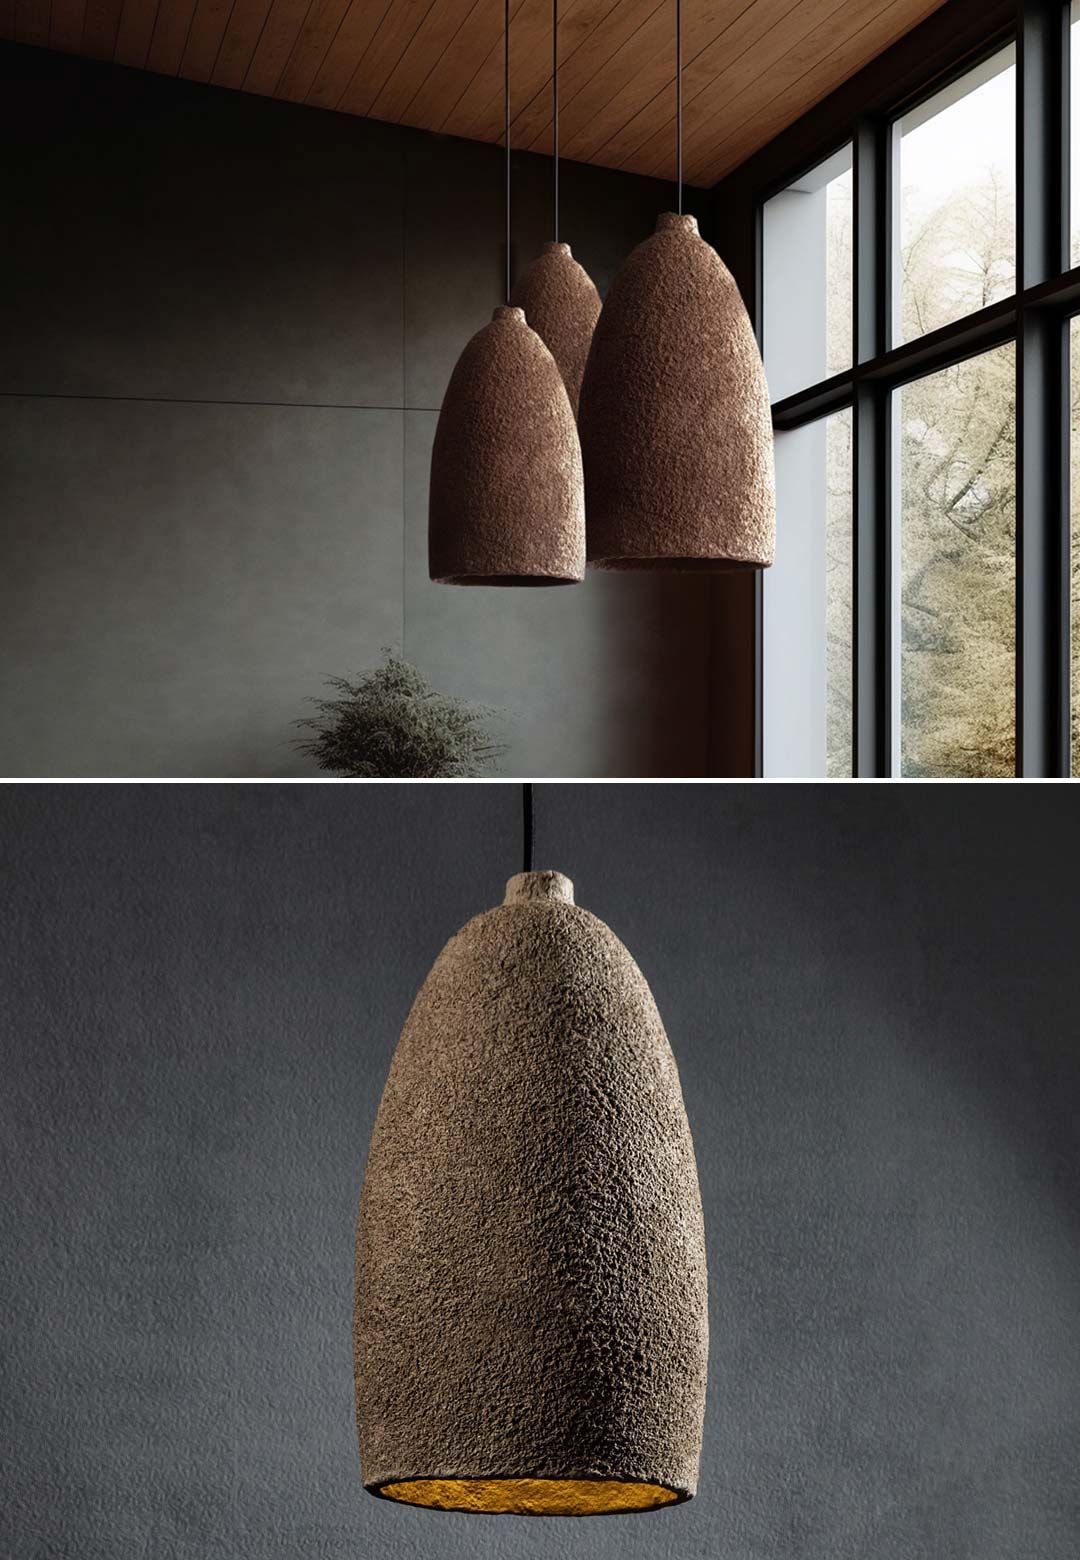 ZBOZHZHA's debut collection features luminaires crafted with recycled cardboard